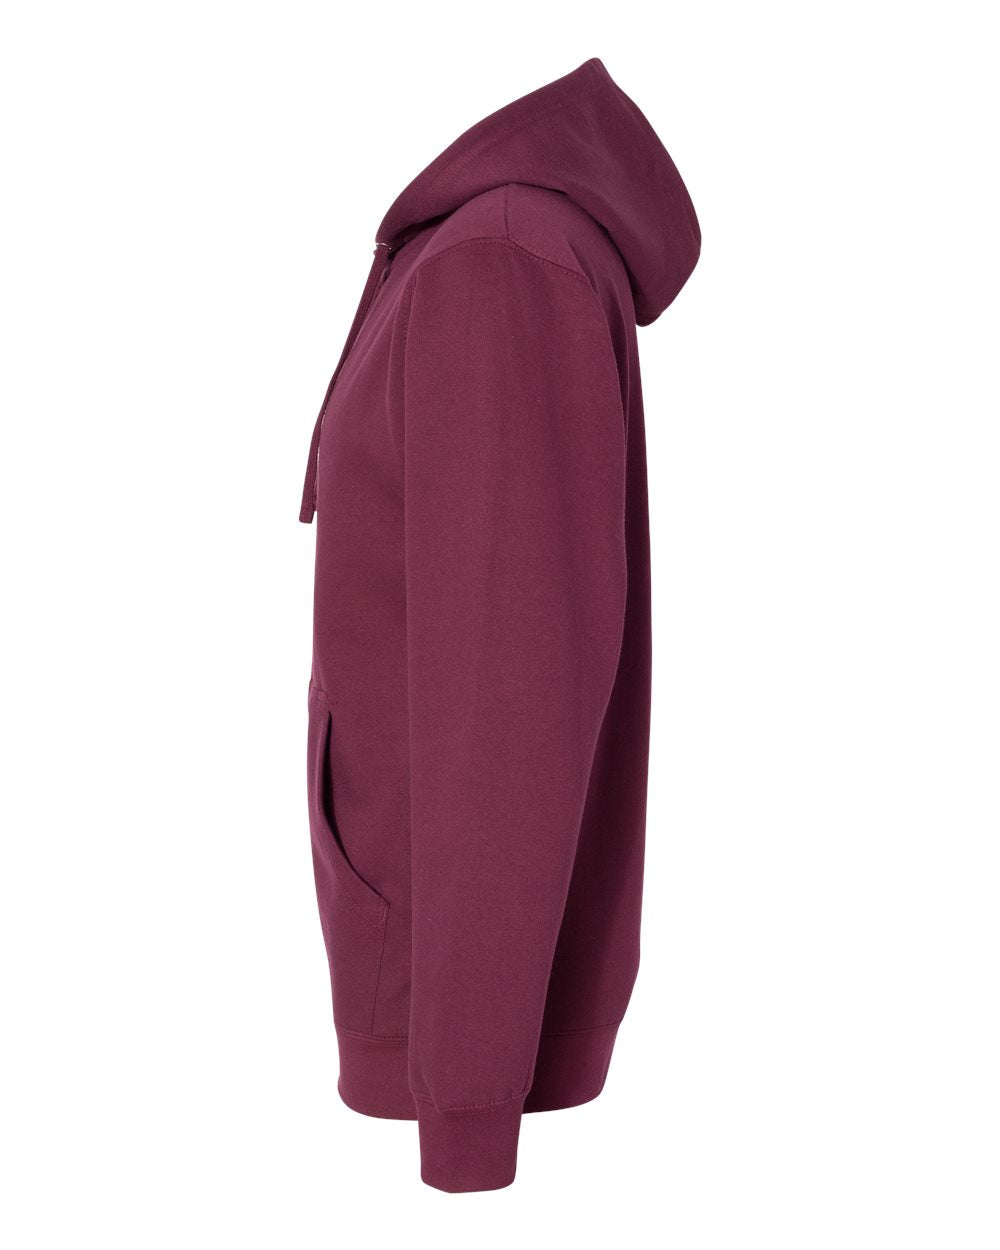 Independent Trading Co. Midweight Full-Zip Hooded Sweatshirt SS4500Z #color_Maroon